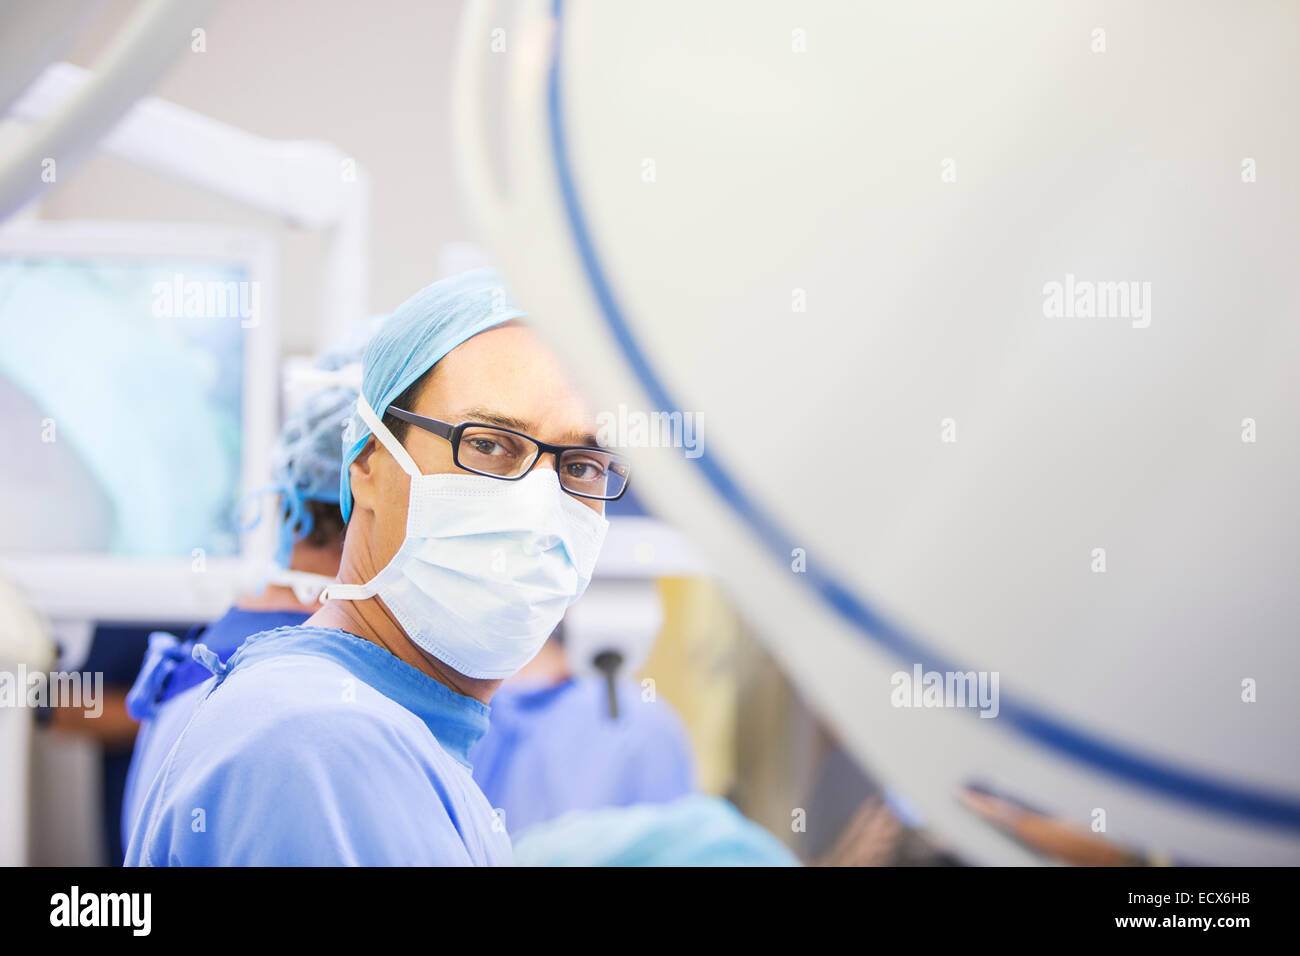 Portrait of masked surgeon in operating theater Stock Photo